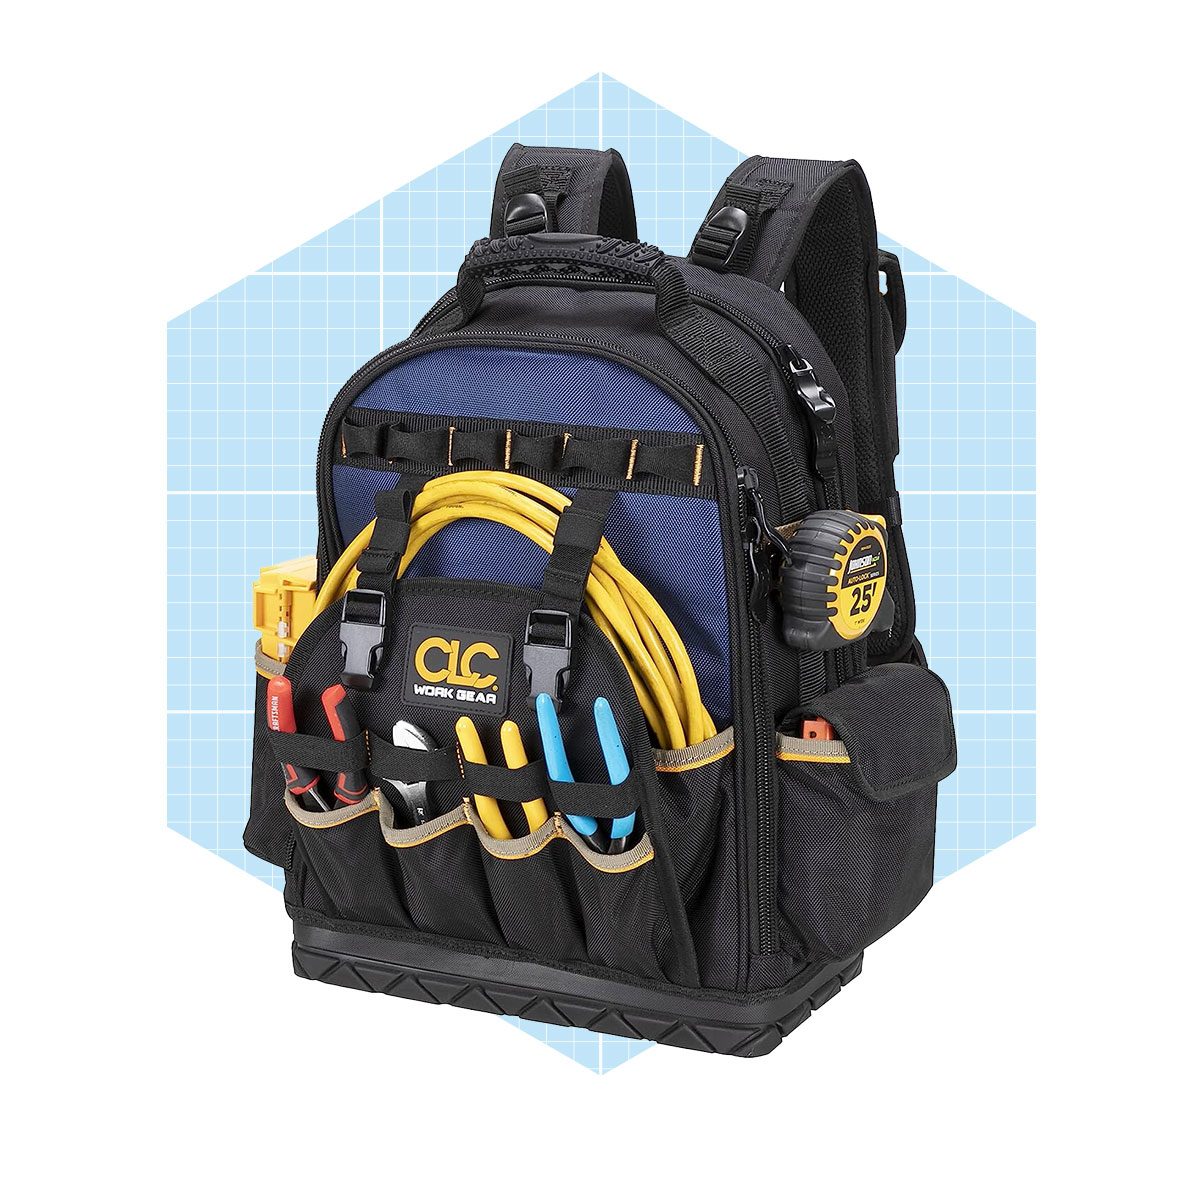 PACKOUT Tool and Equipment Backpack